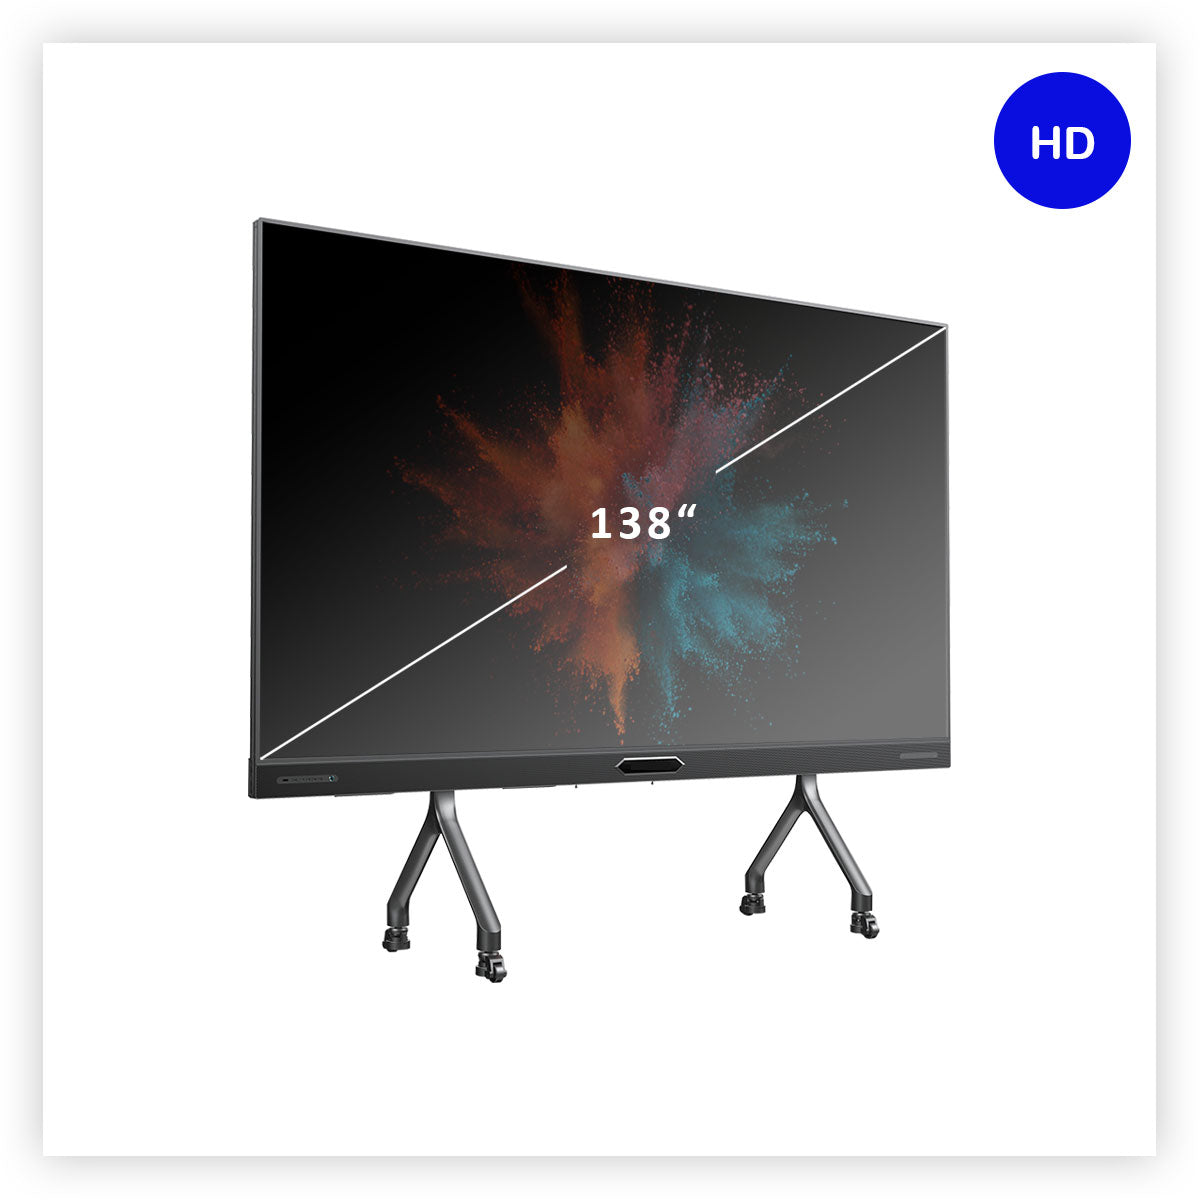 OmniTouch All-in-One HD System 138" P1.5mm